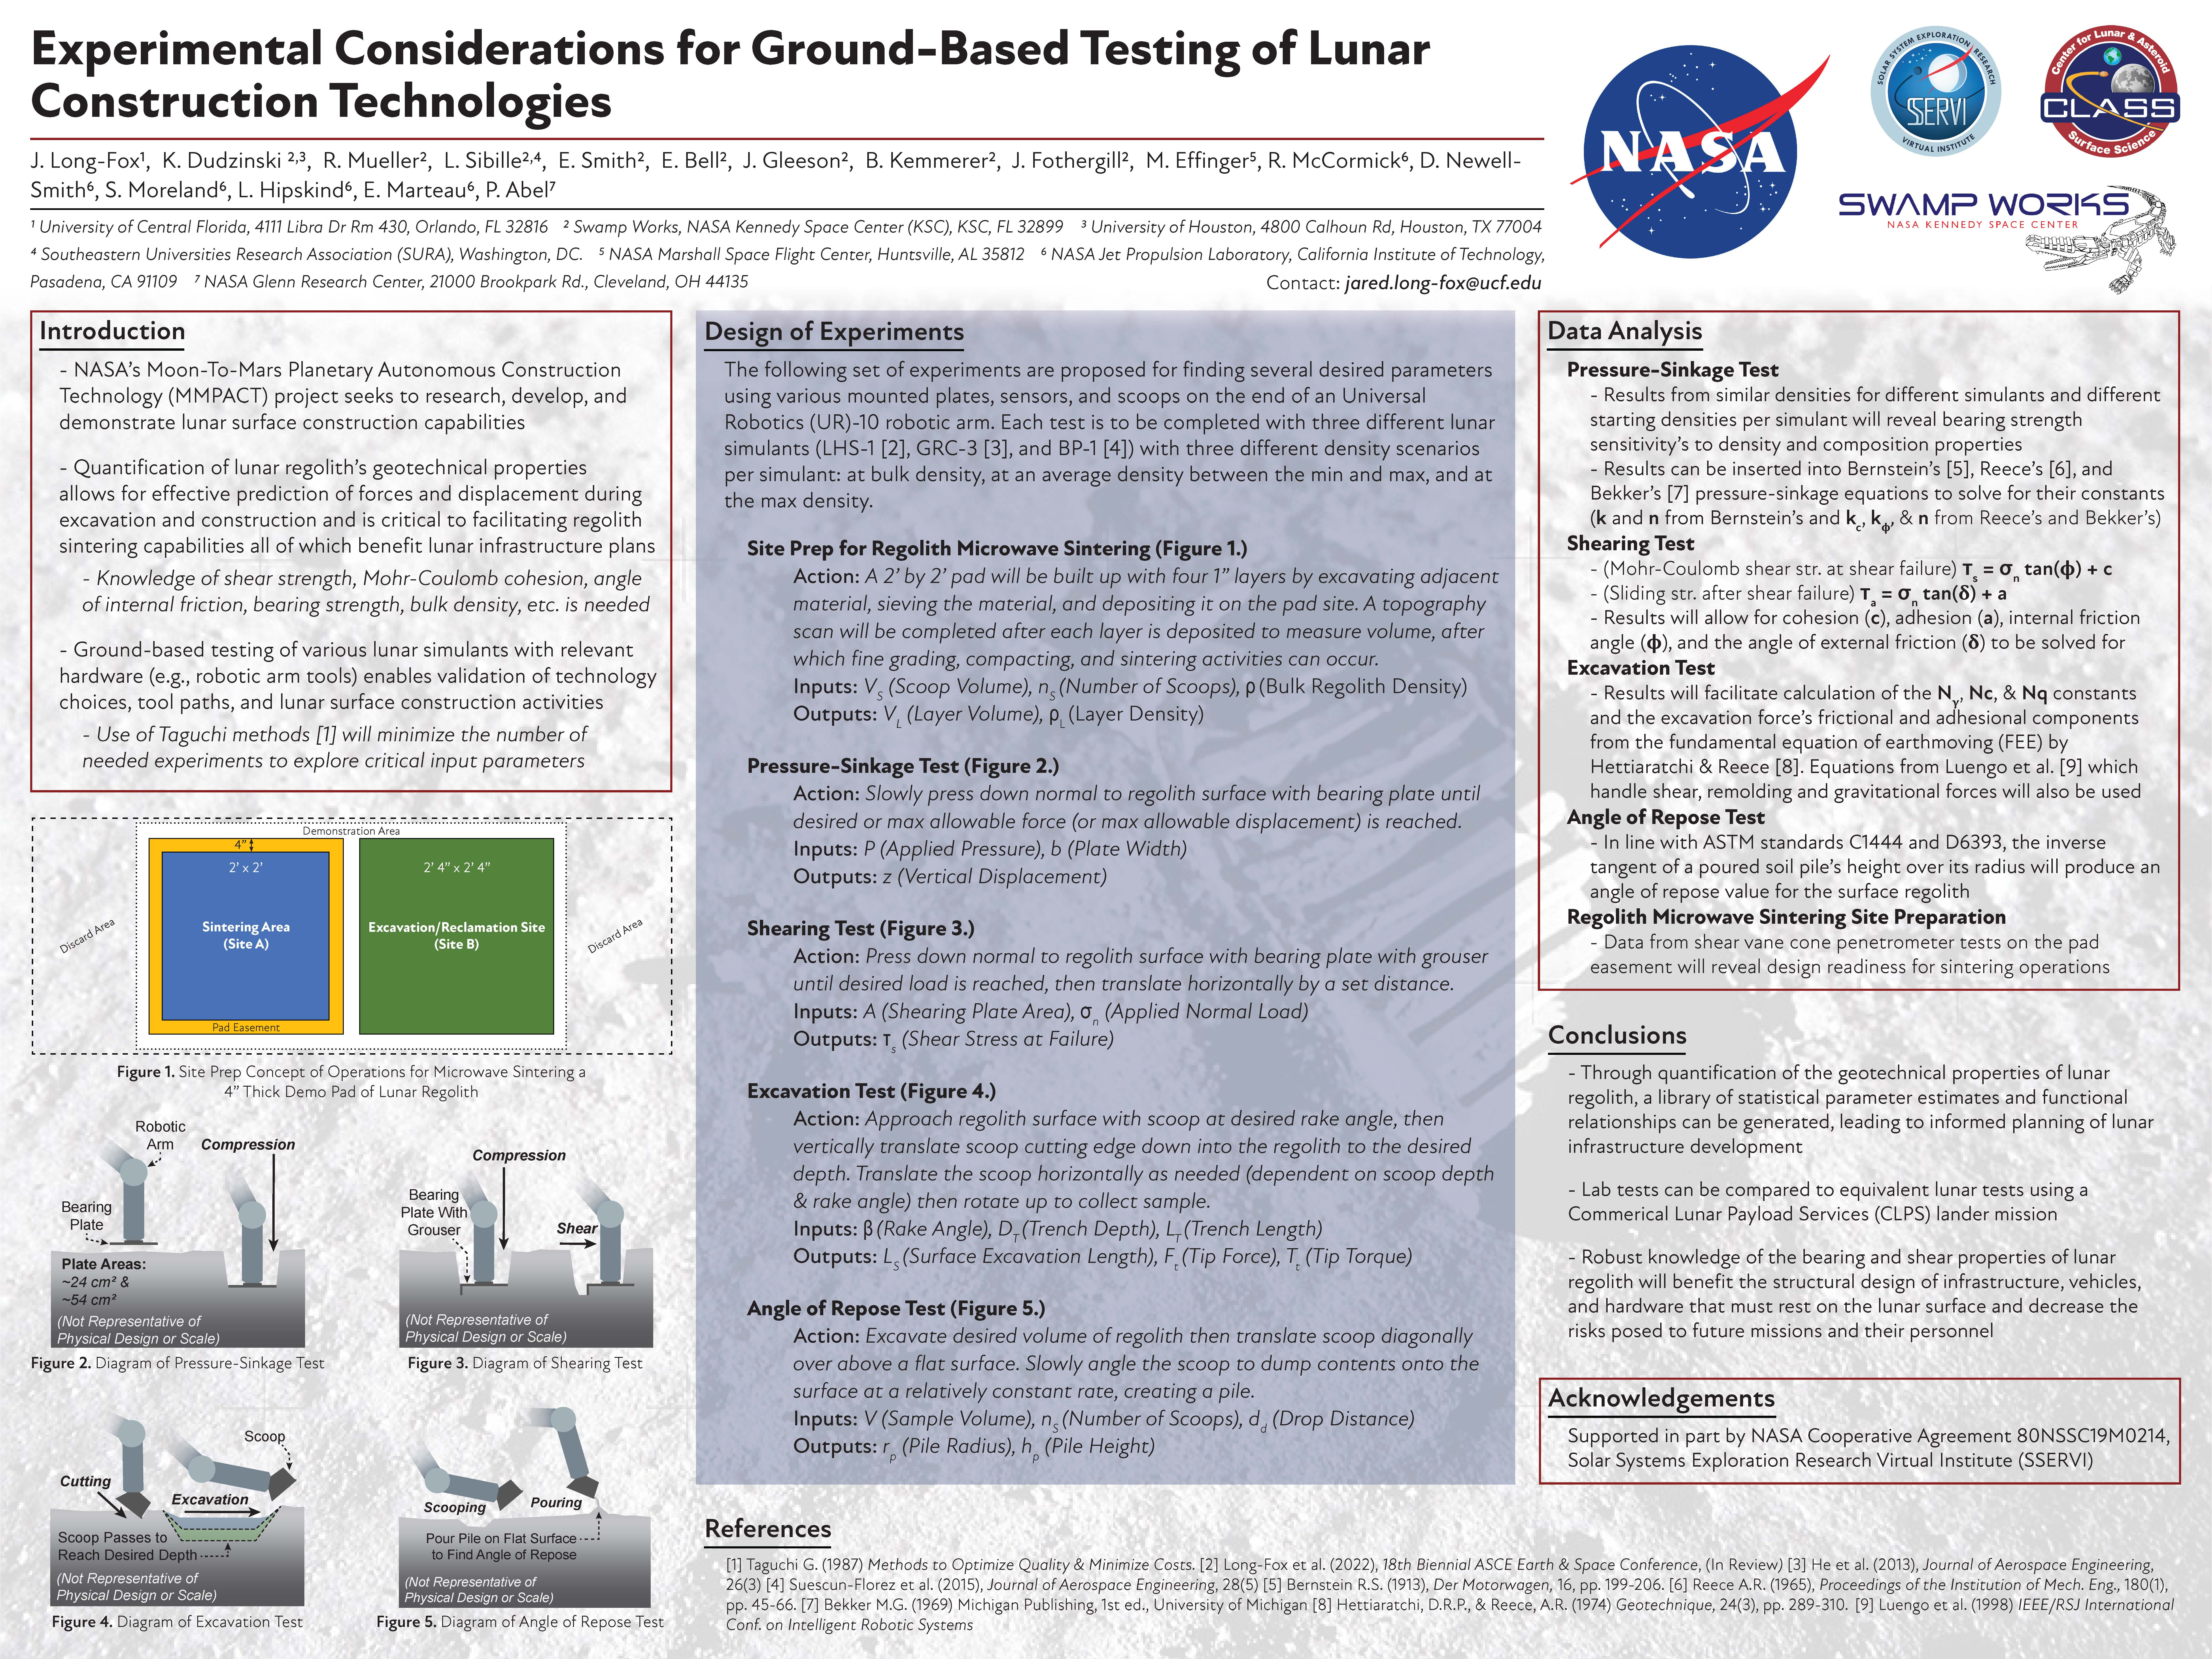 Experimental Considerations for Ground-based Testing of Lunar Construction Technologies